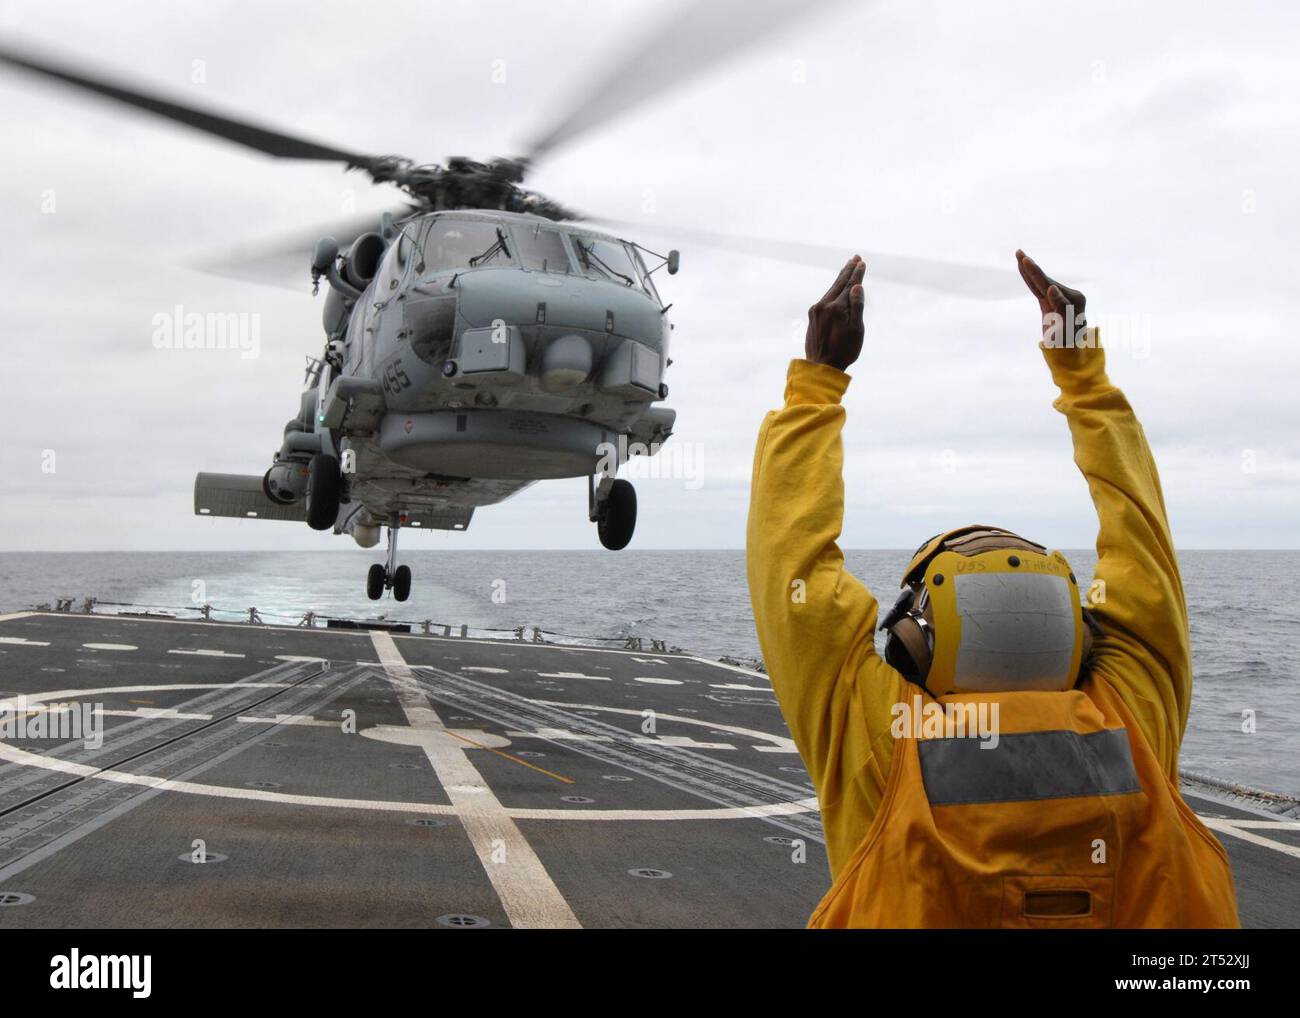 110711ZI300-135 PACIFIC OCEAN (July 11, 2011) A landing signal enlisted signals to the pilots of an SH-60B Sea Hawk helicopter taking off from the guided-missile frigate USS Thach (FFG 43). The SH-60B Sea Hawk is assigned to Anti-Submarine Squadron Light (HSL) 44 and is embarked aboard USS Boone (FFG 28). Thach and Boone are deployed to South America supporting Southern Seas 2011. Stock Photo